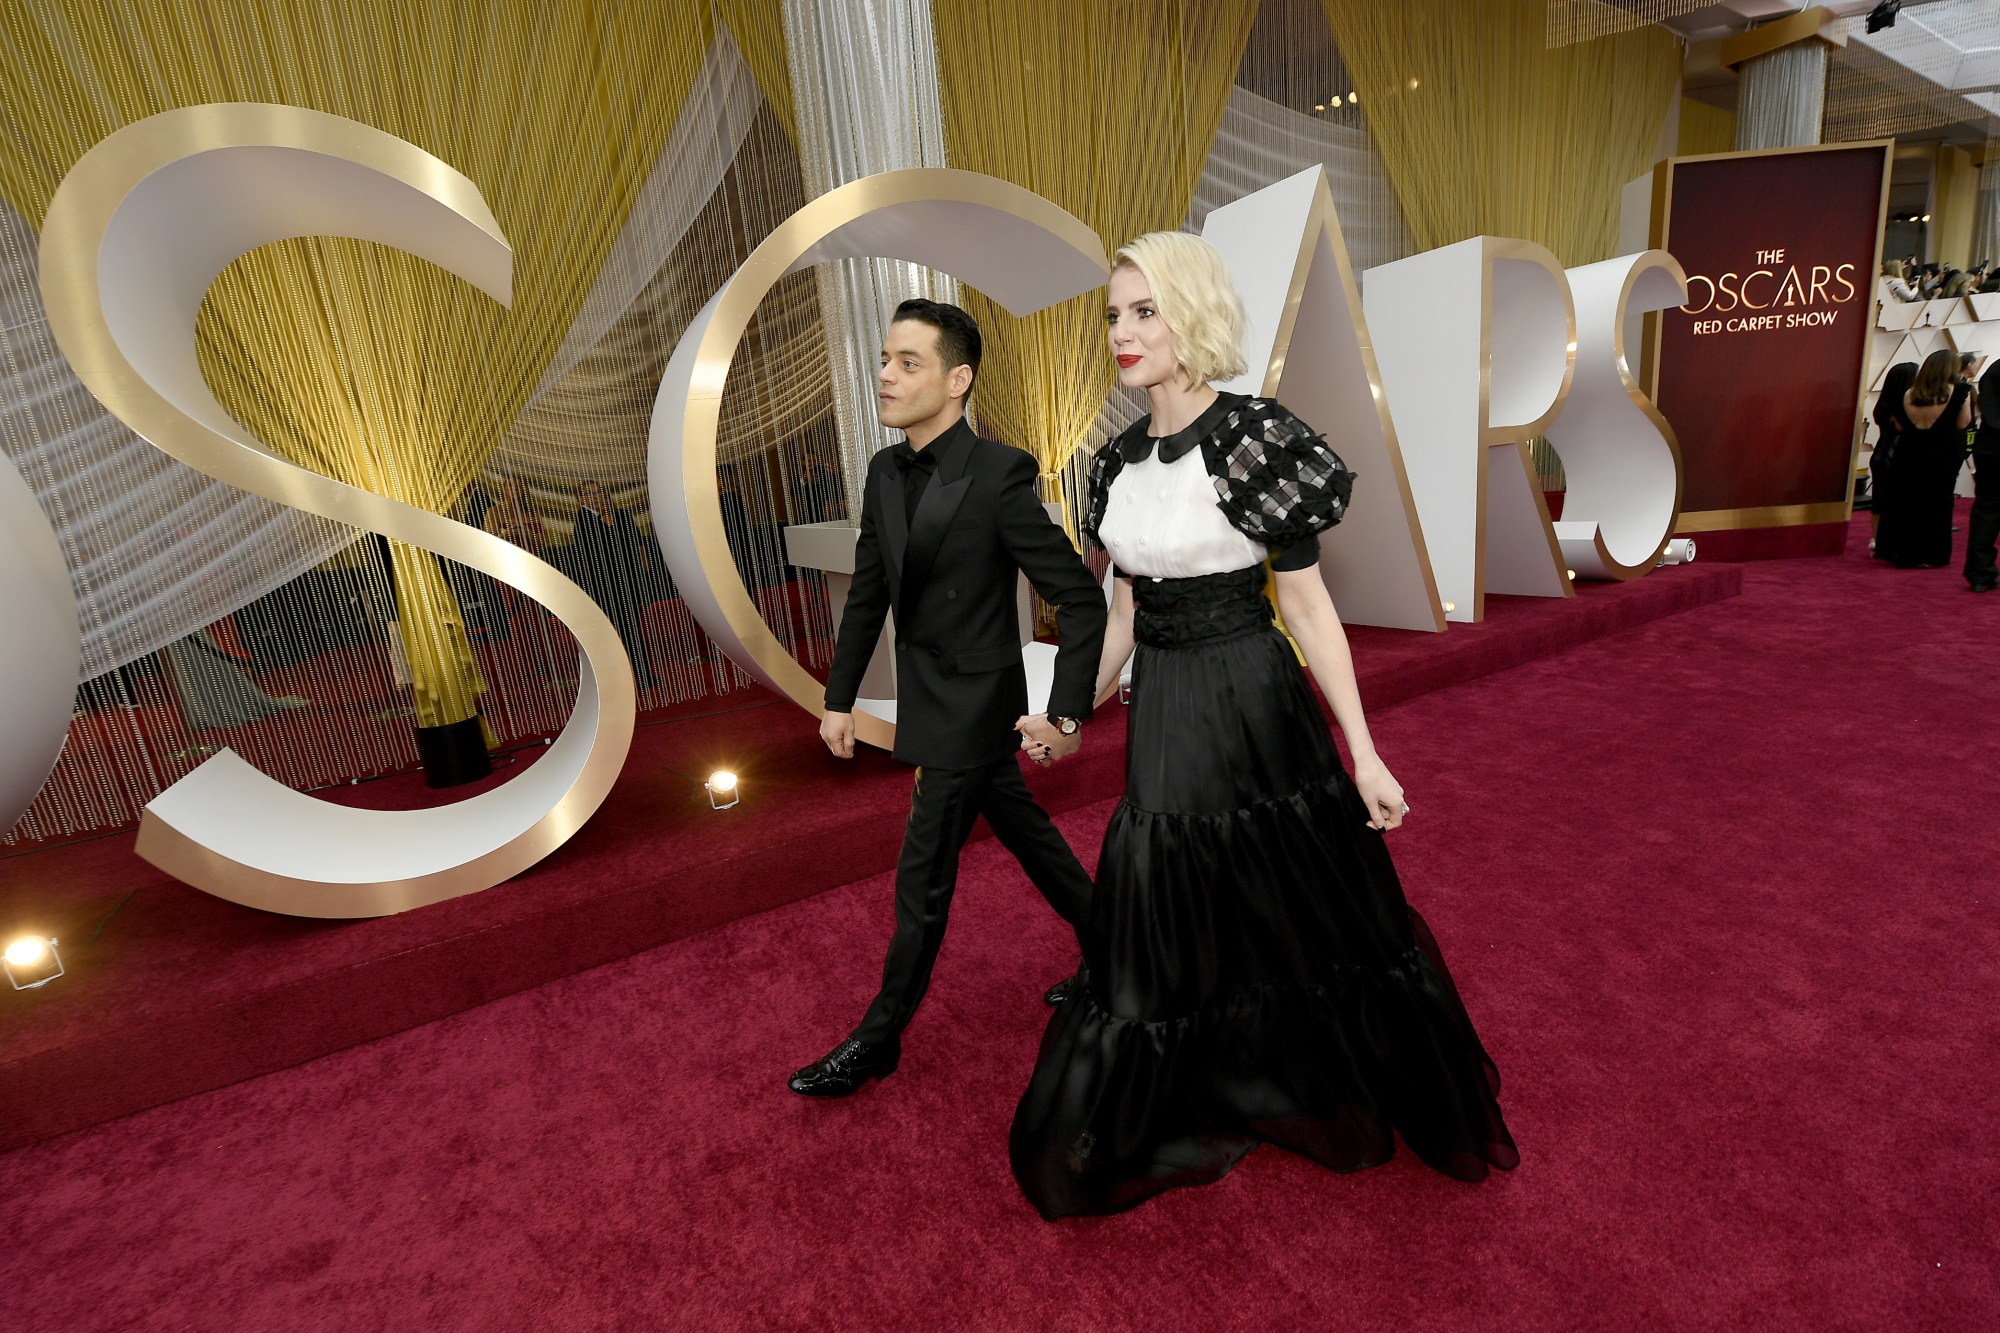 Louis Vuitton and Christian Siriano Go Eco-Friendly at the Oscars